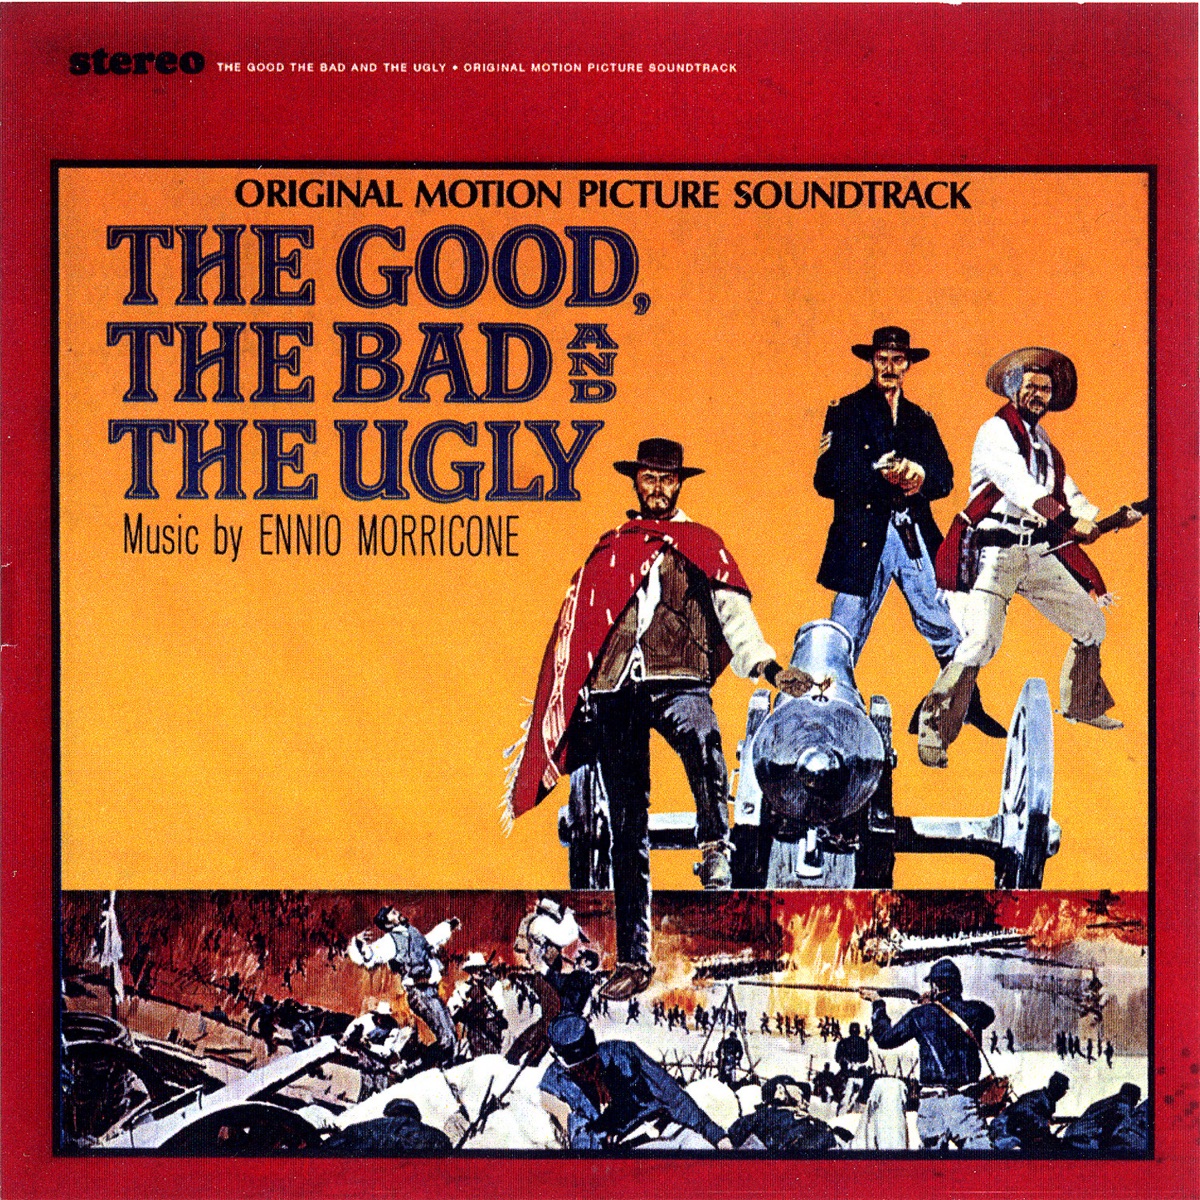 The Good, The Bad and The Ugly album cover